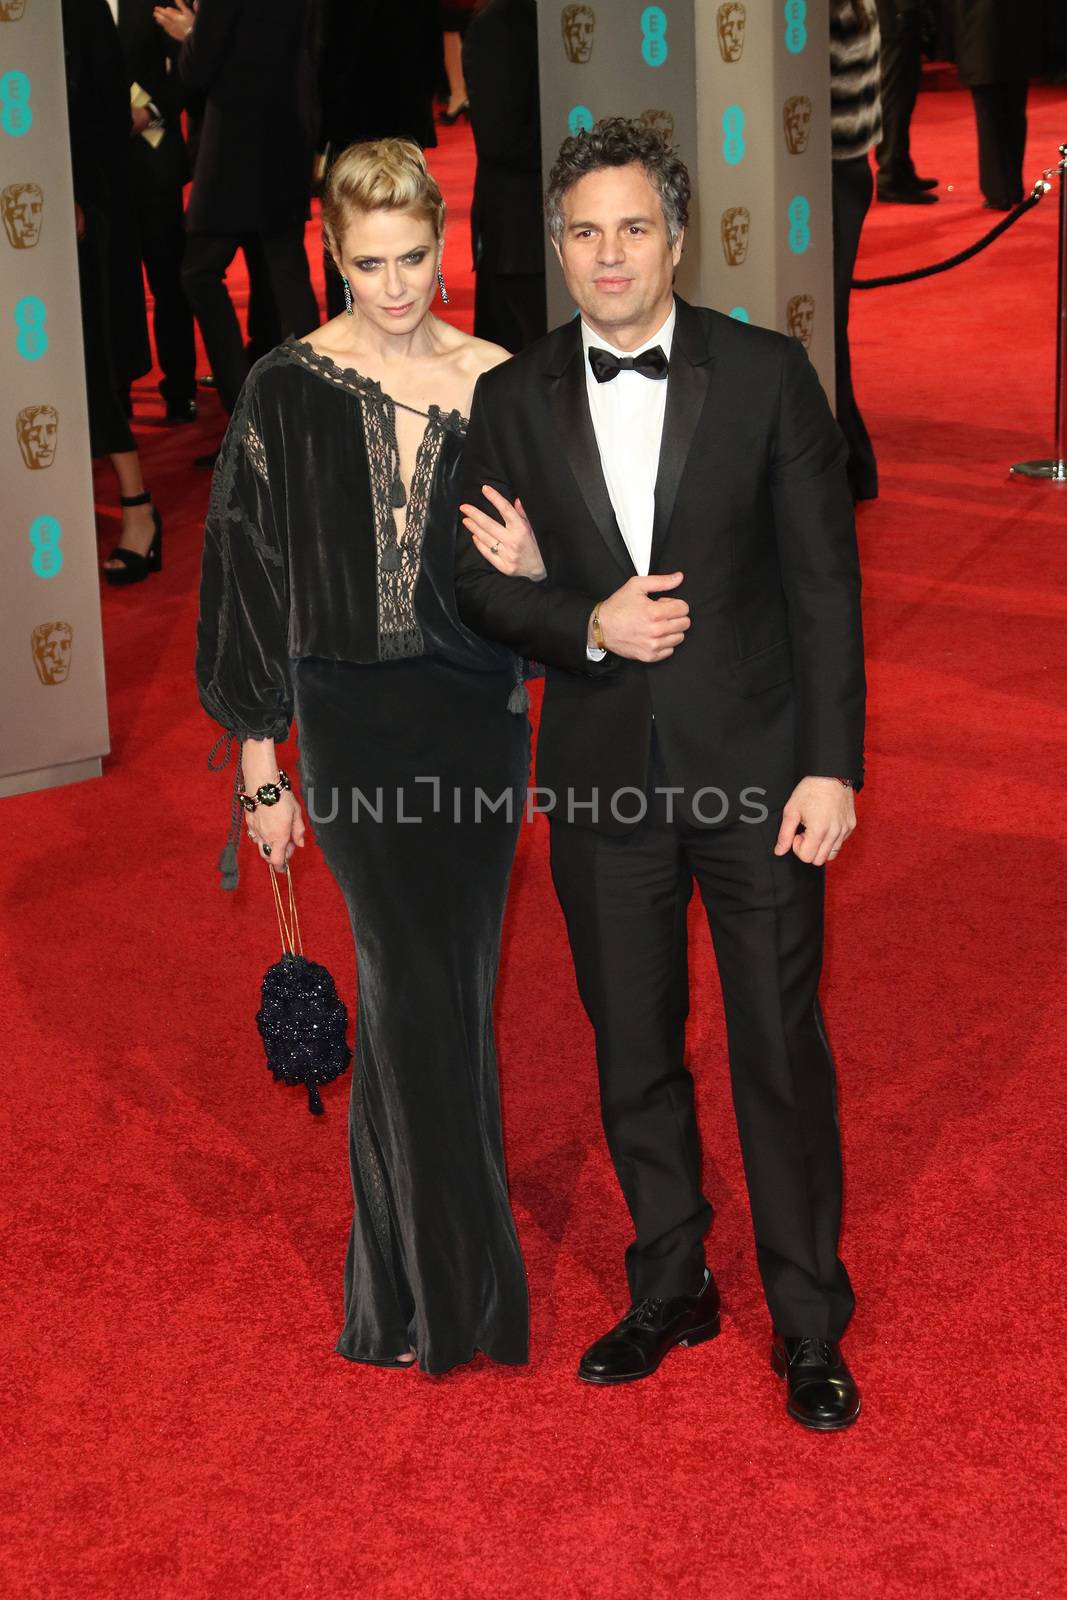 UK, London: American actor Mark Ruffalo poses with wife Sunrise Coigney on the red Carpet at the EE British Academy Film Awards, BAFTA Awards, at the Royal Opera House in London, England, on 14 February 2016.